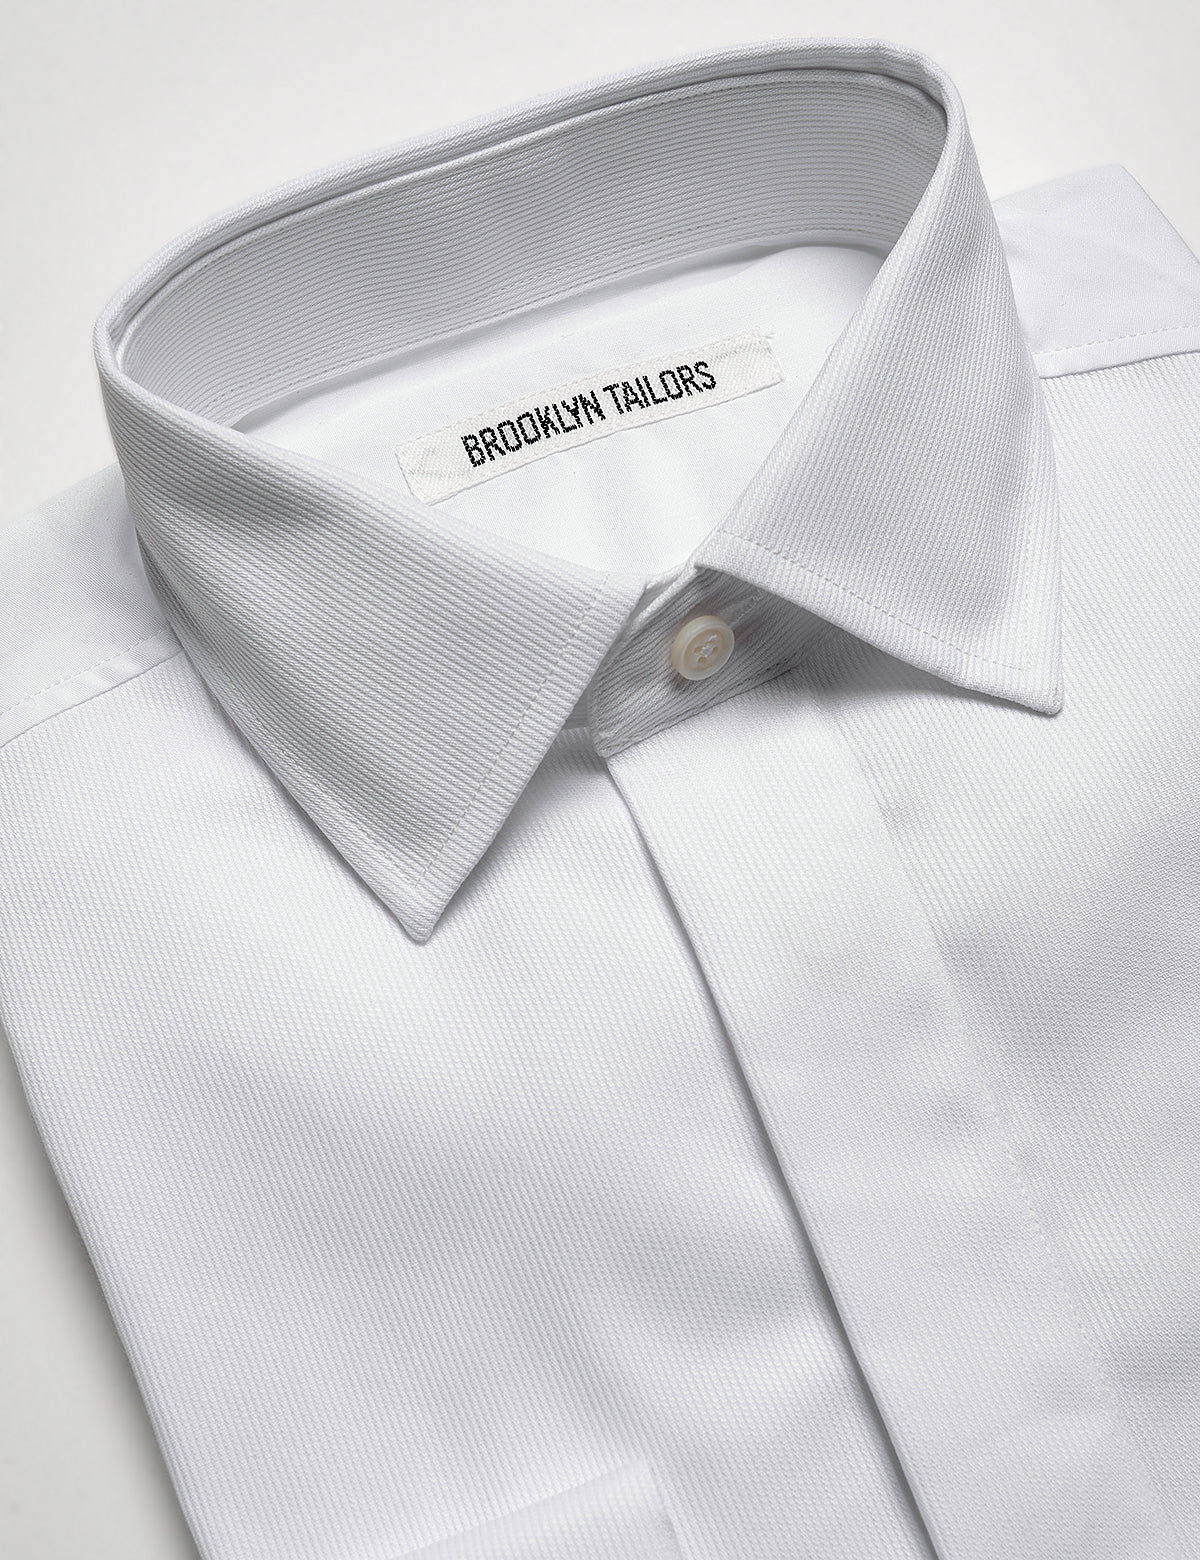 Detail of Brooklyn Tailors French Cuff Tuxedo Shirt With Covered Buttons - Bar Pique showing collar and fabric texture